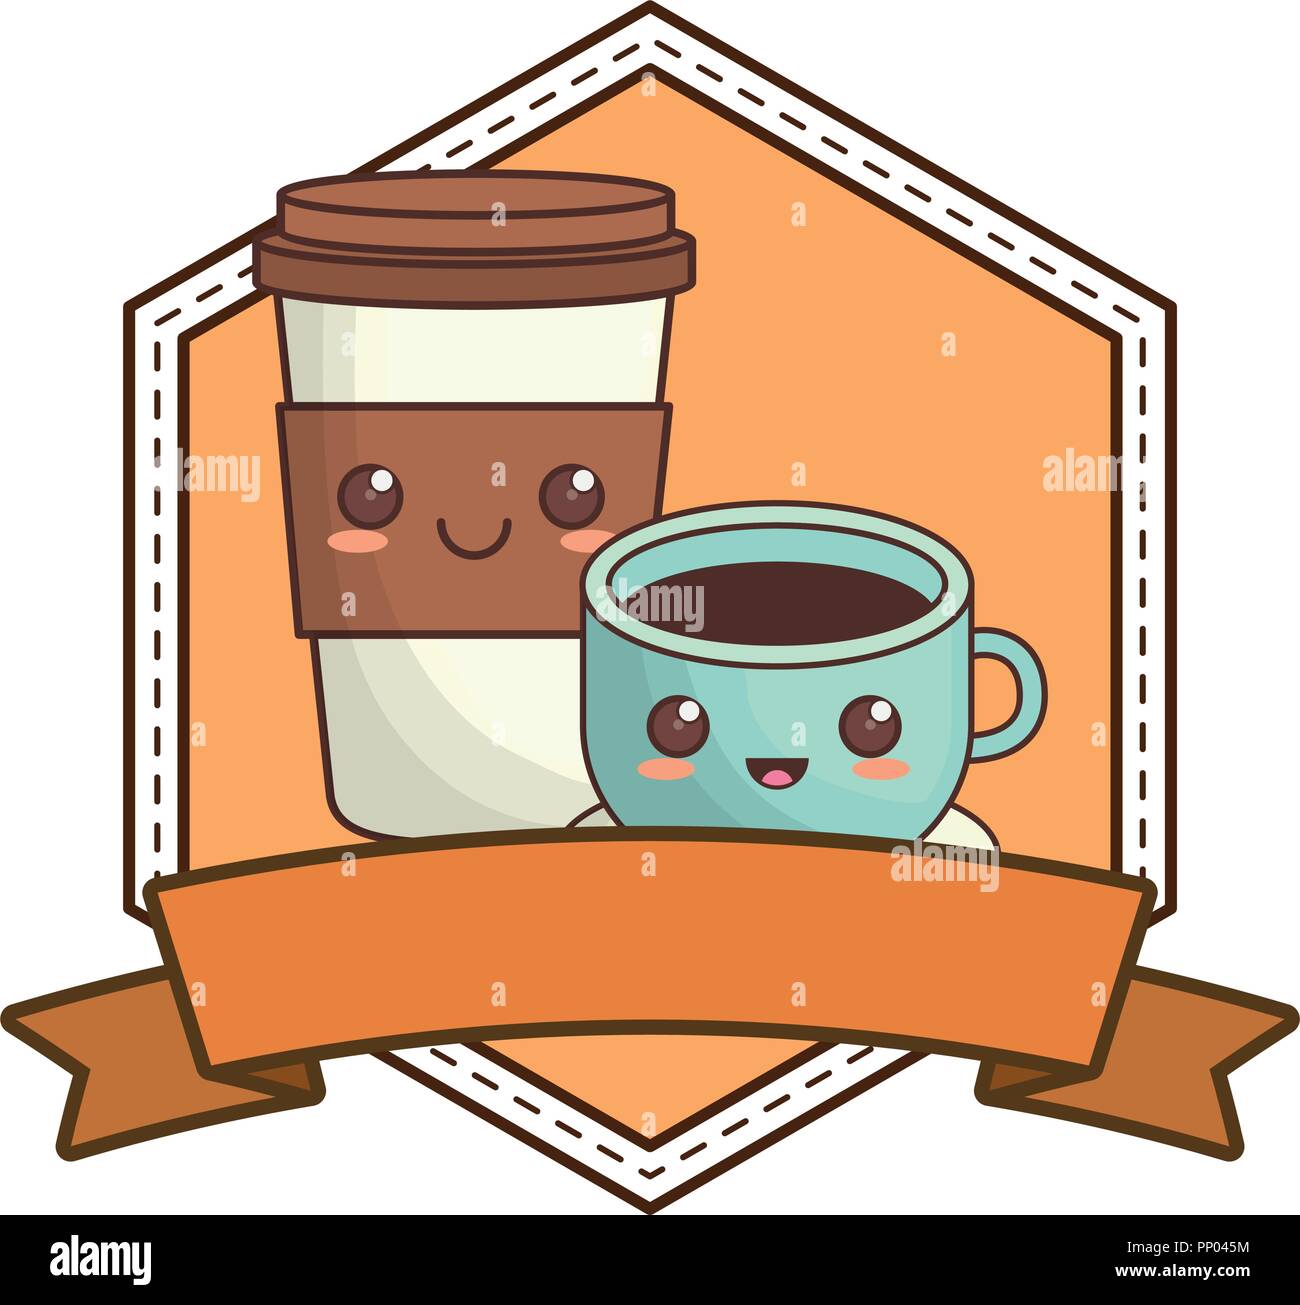 https://c8.alamy.com/comp/PP045M/emblem-with-kawaii-coffee-mug-and-cup-over-white-background-vector-illustration-PP045M.jpg